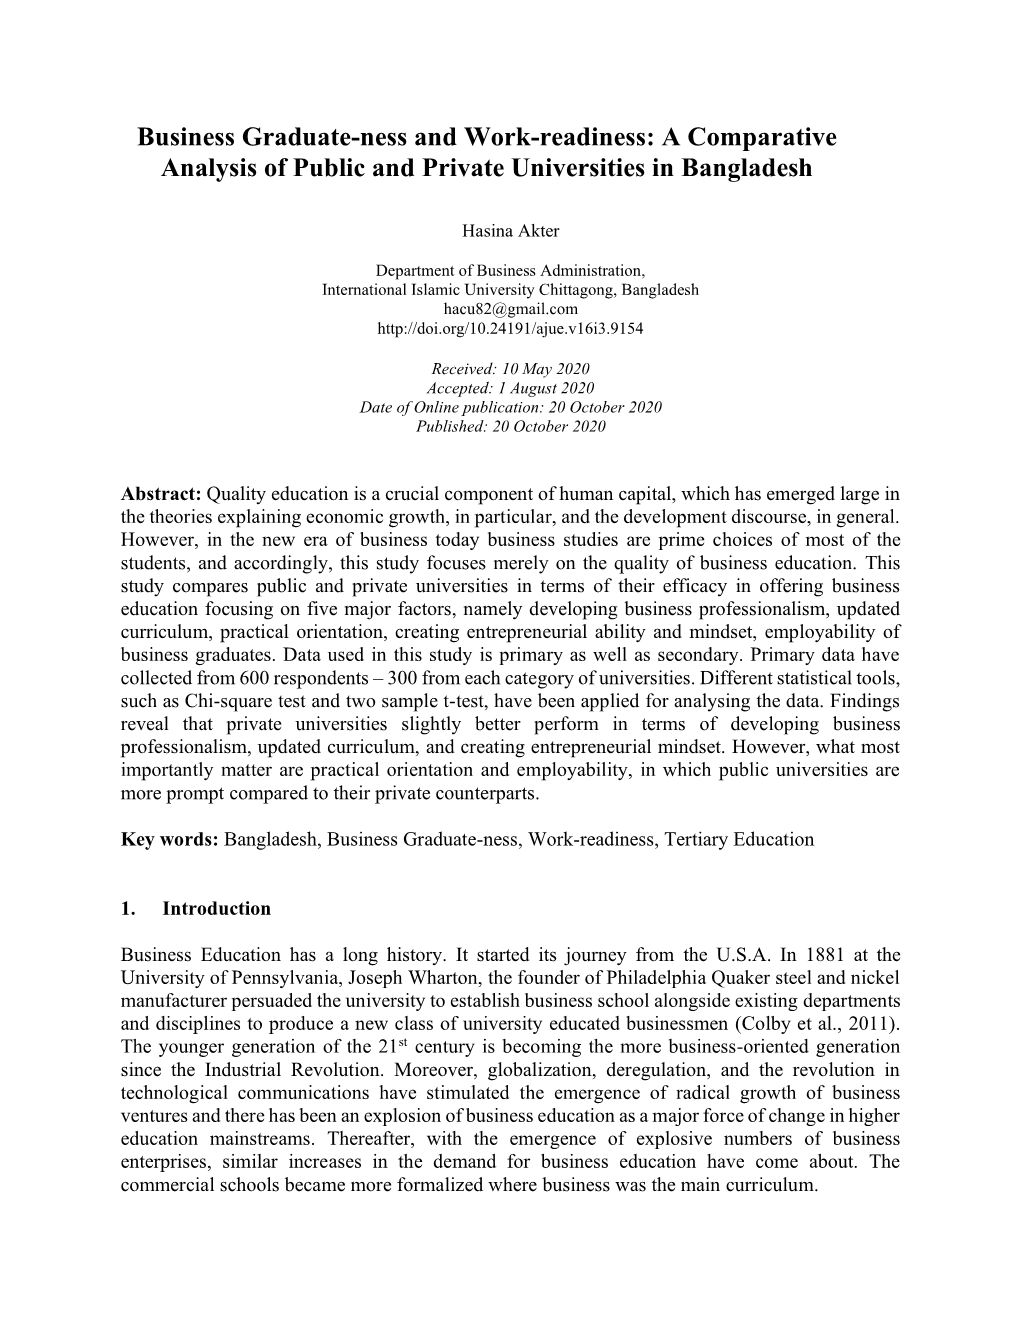 A Comparative Analysis of Public and Private Universities in Bangladesh